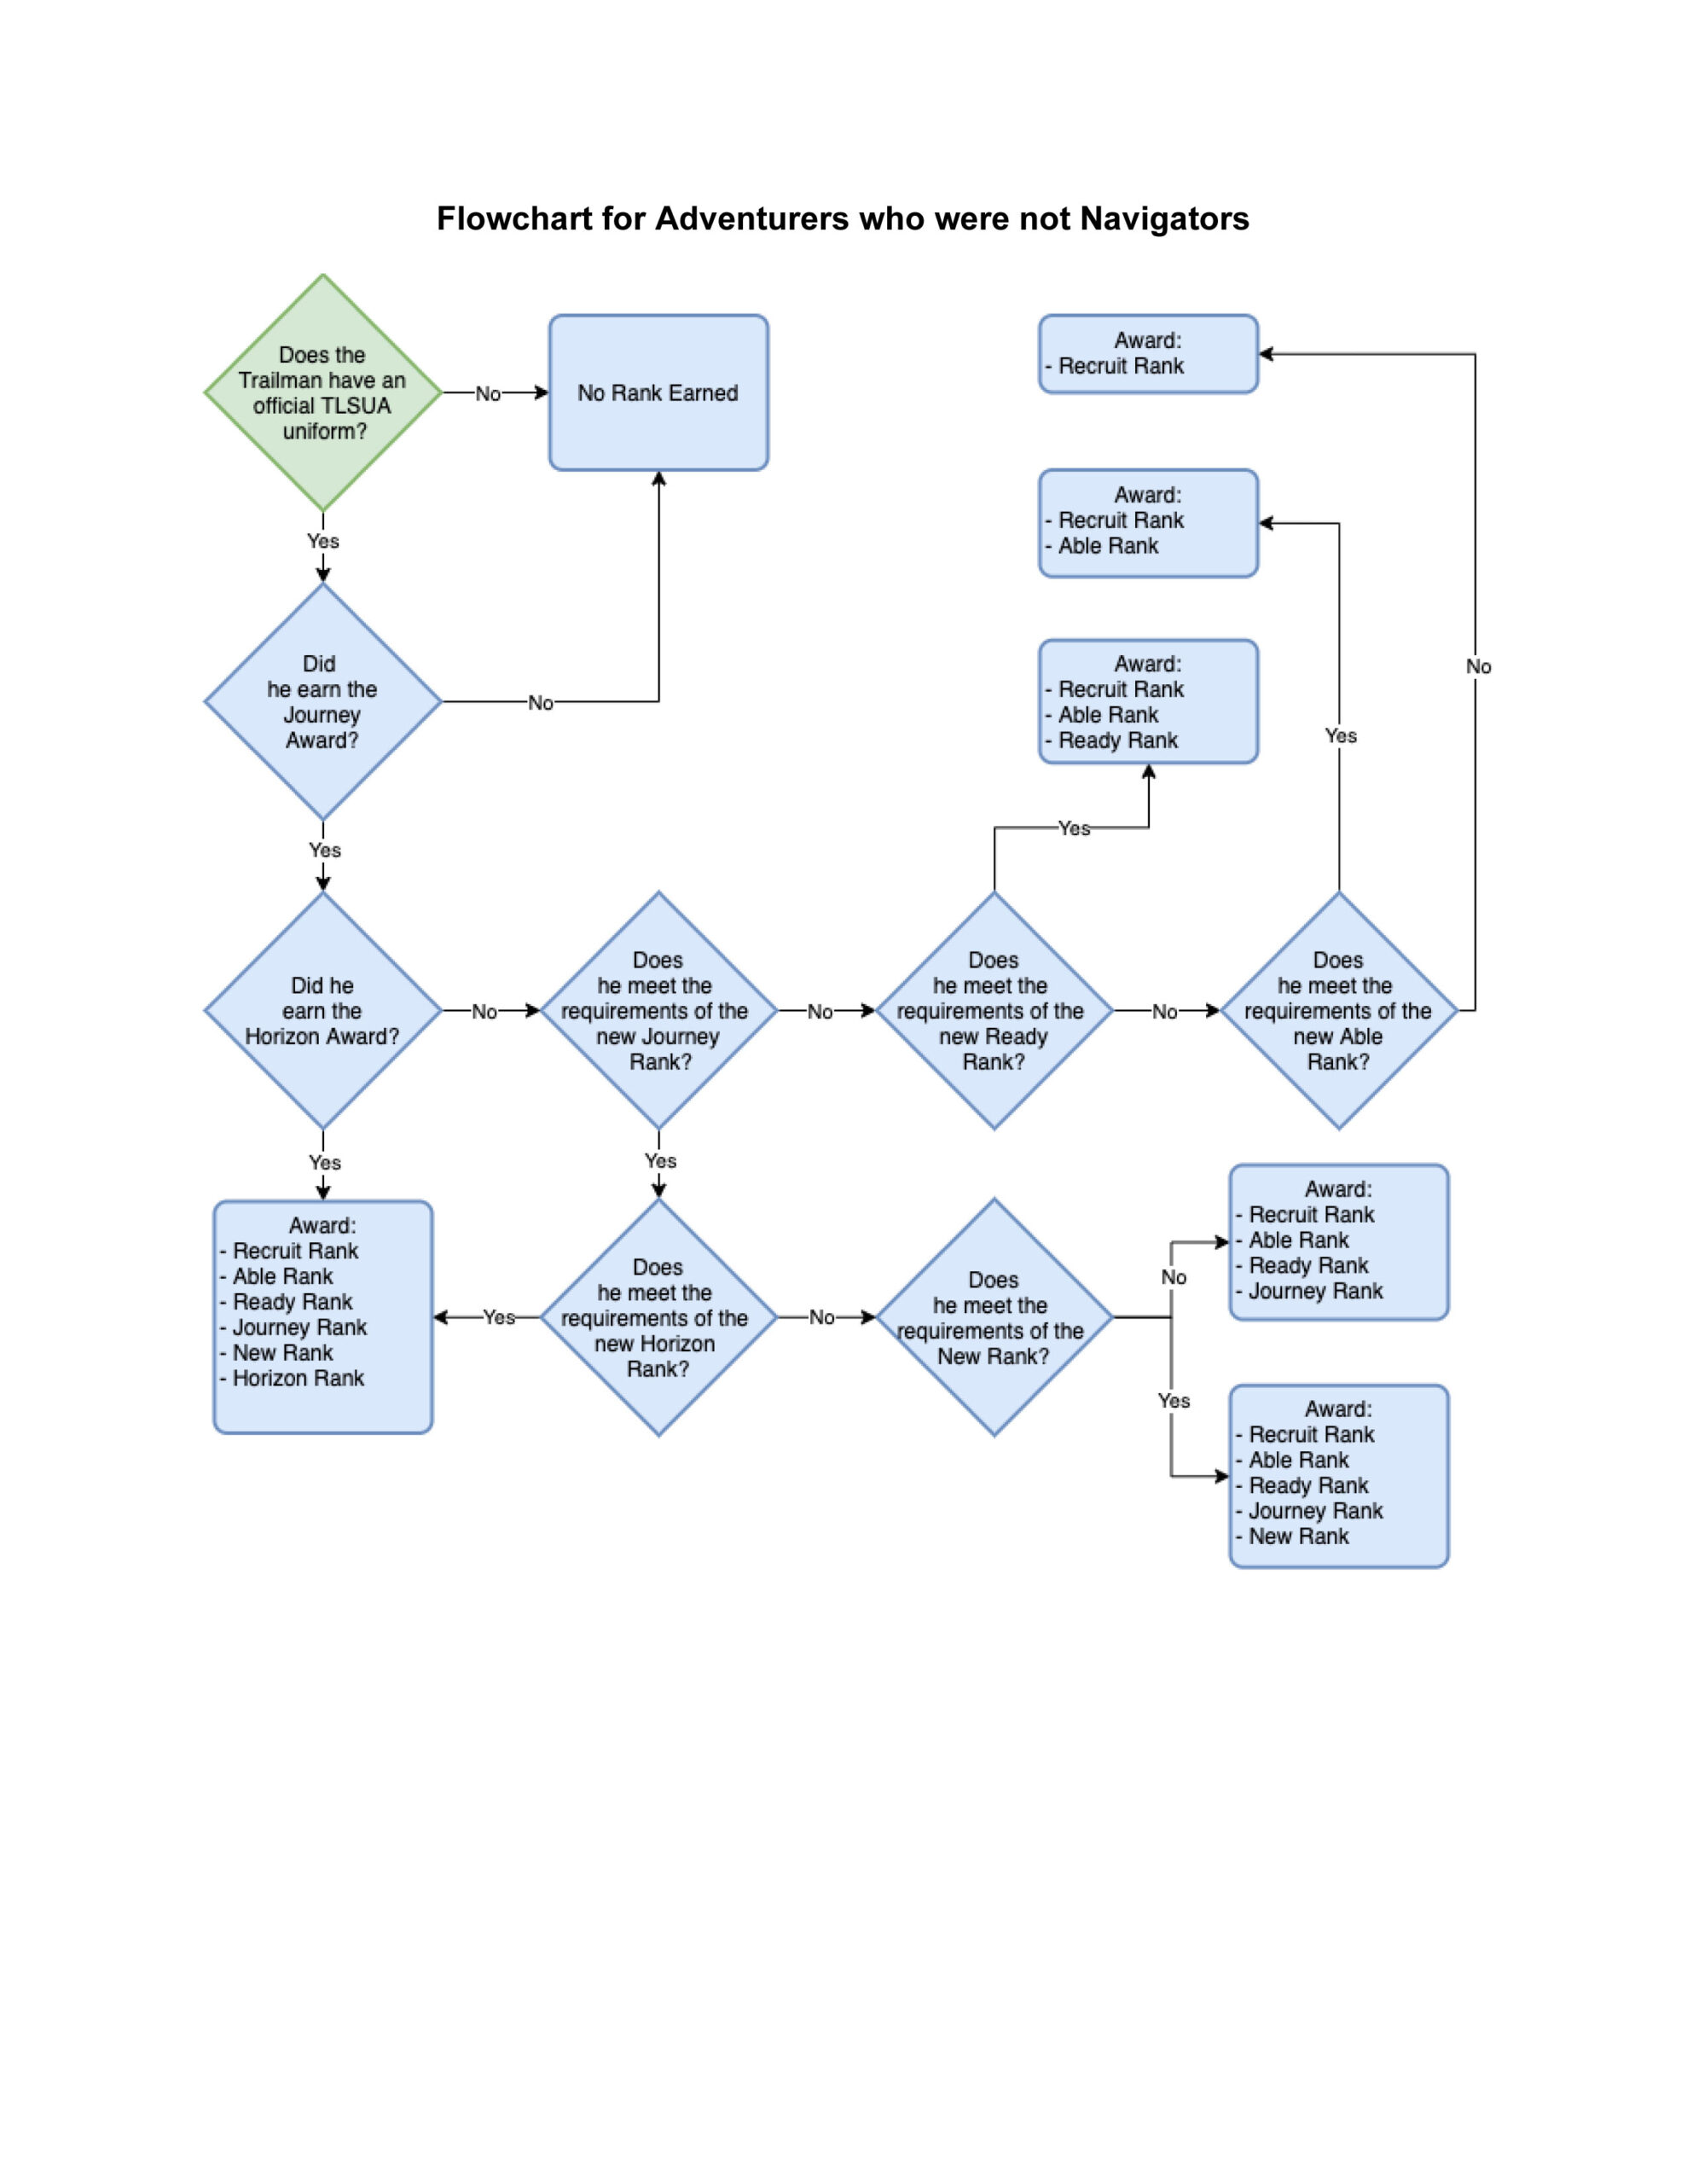 flowchart for adv who were not nav scaled